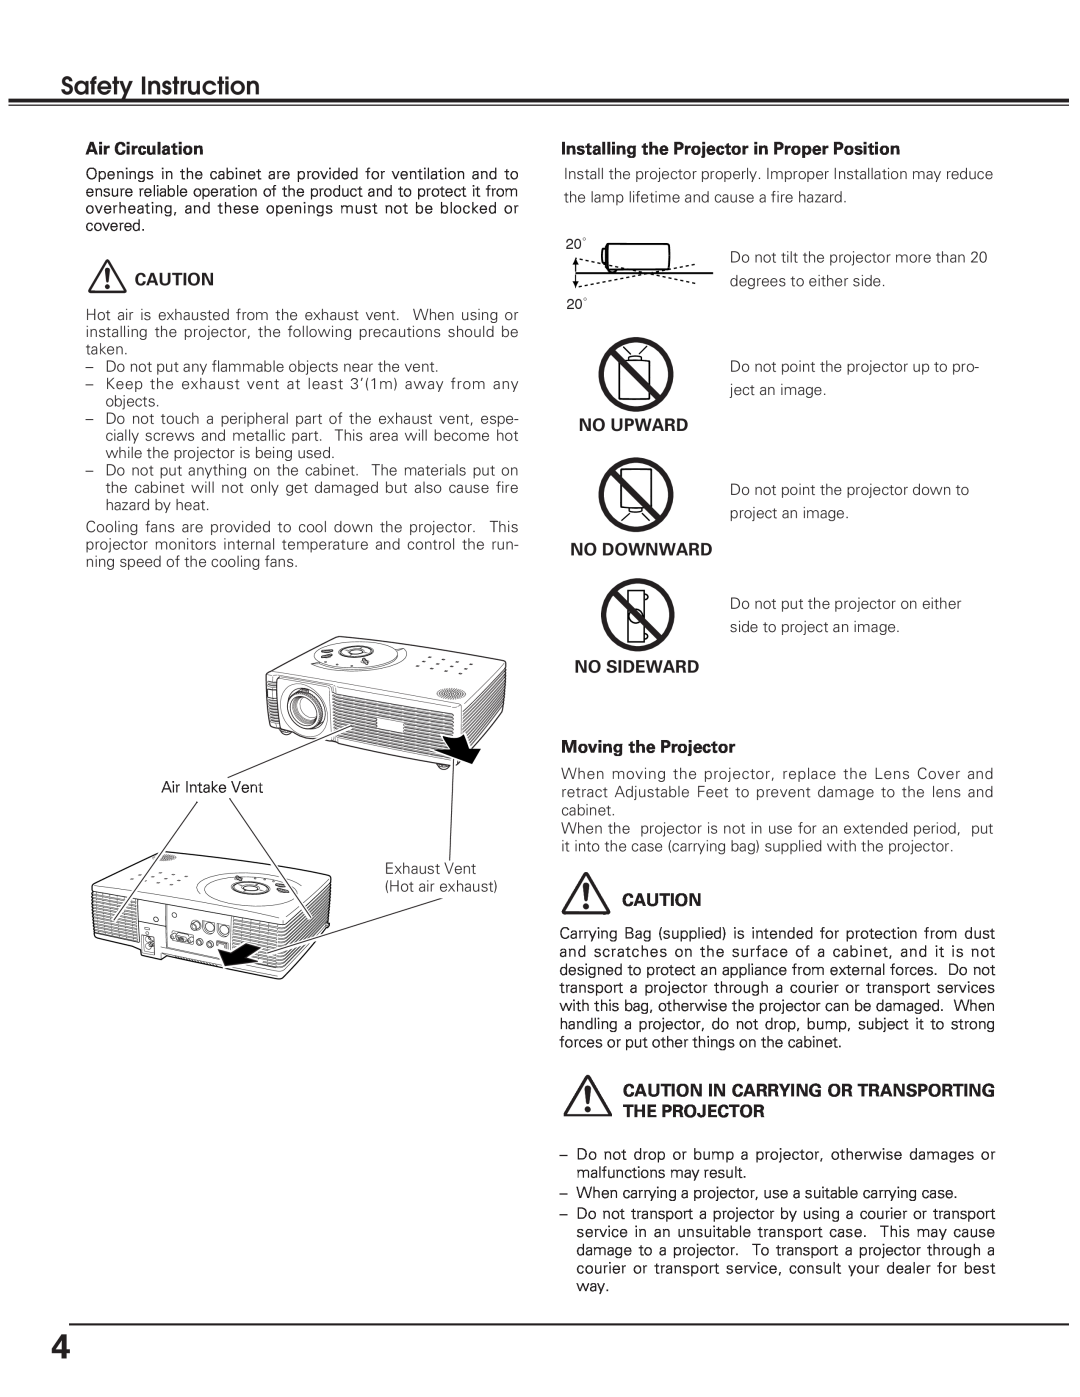 Eiki LC-SD10 Safety Instruction, Air Circulation, Installing the Projector in Proper Position, No Upward, No Downward 